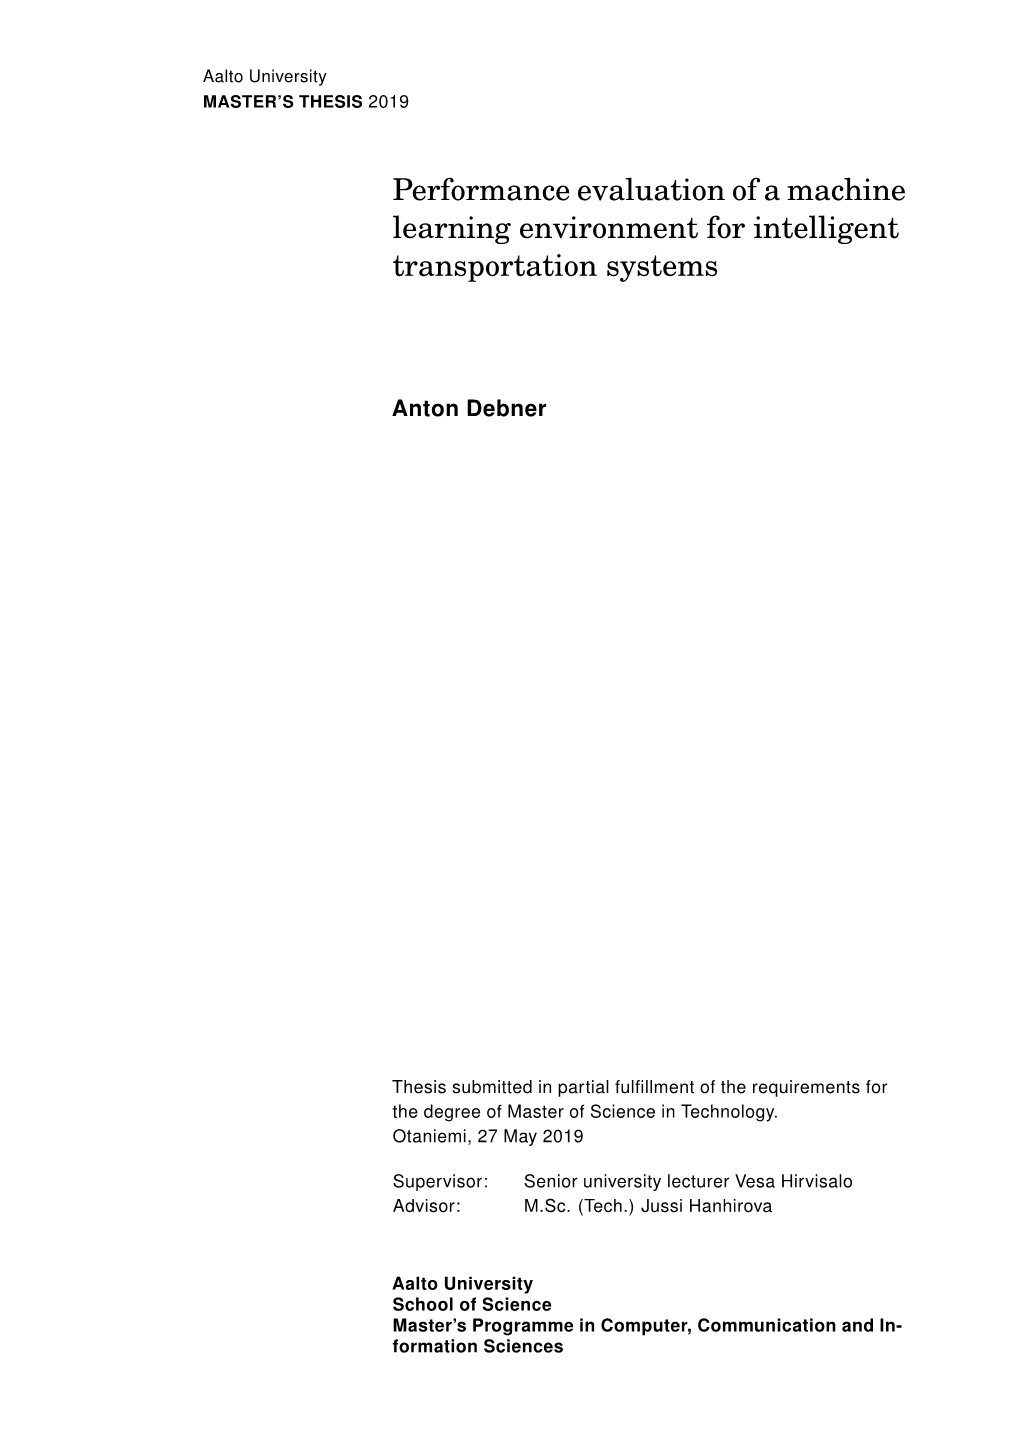 Performance Evaluation of a Machine Learning Environment for Intelligent Transportation Systems